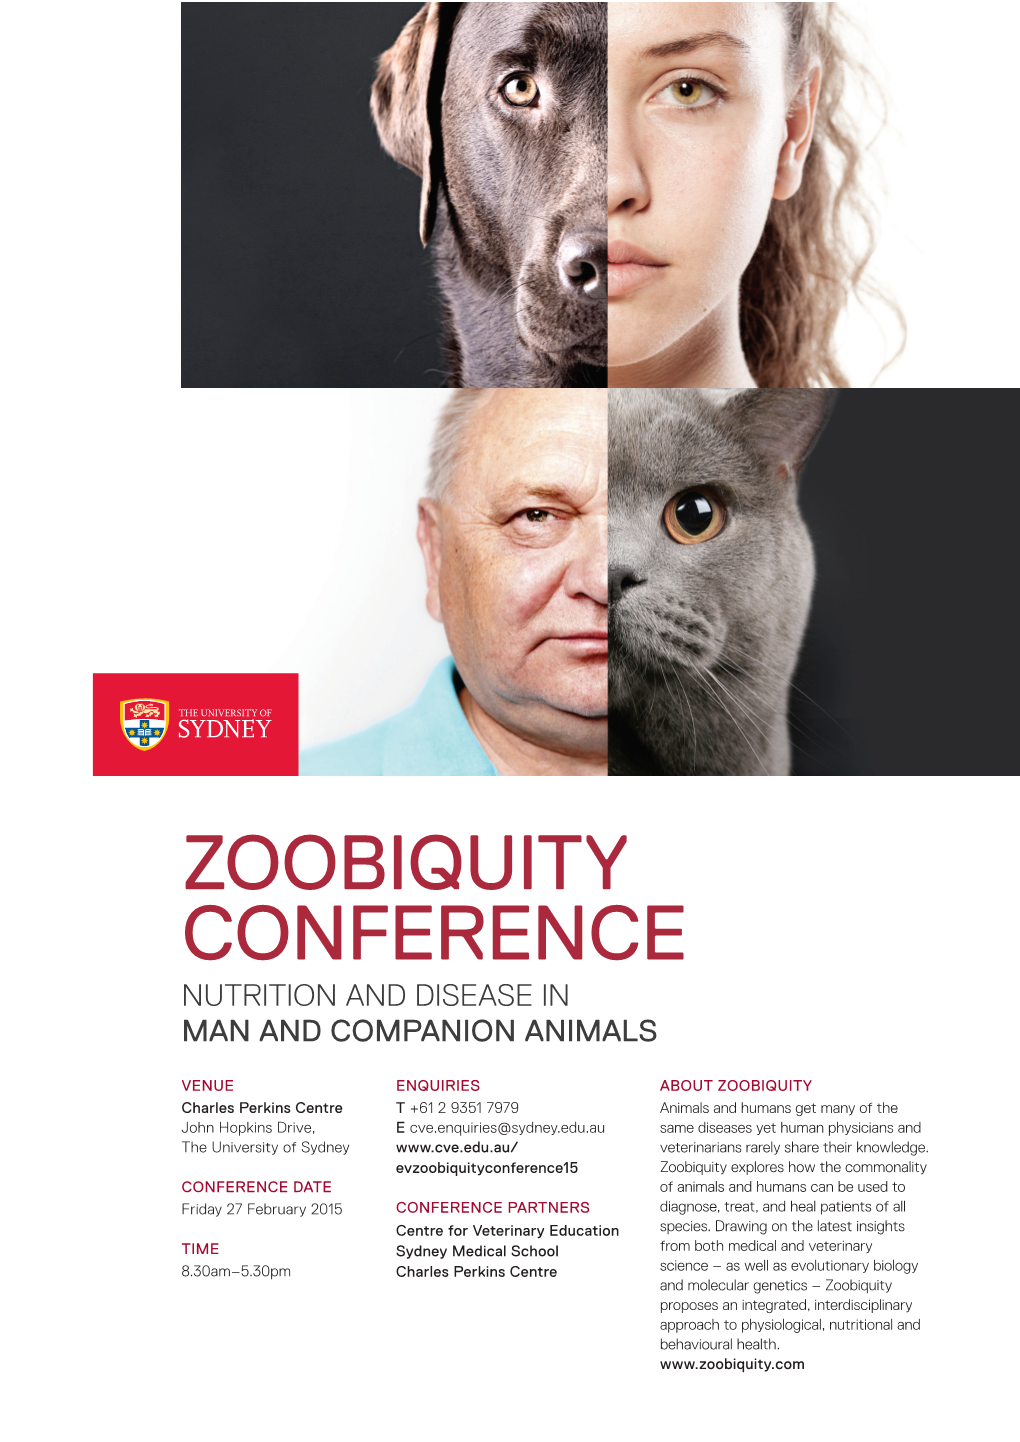 Zoobiquity Conference Nutrition and Disease in Man and Companion Animals